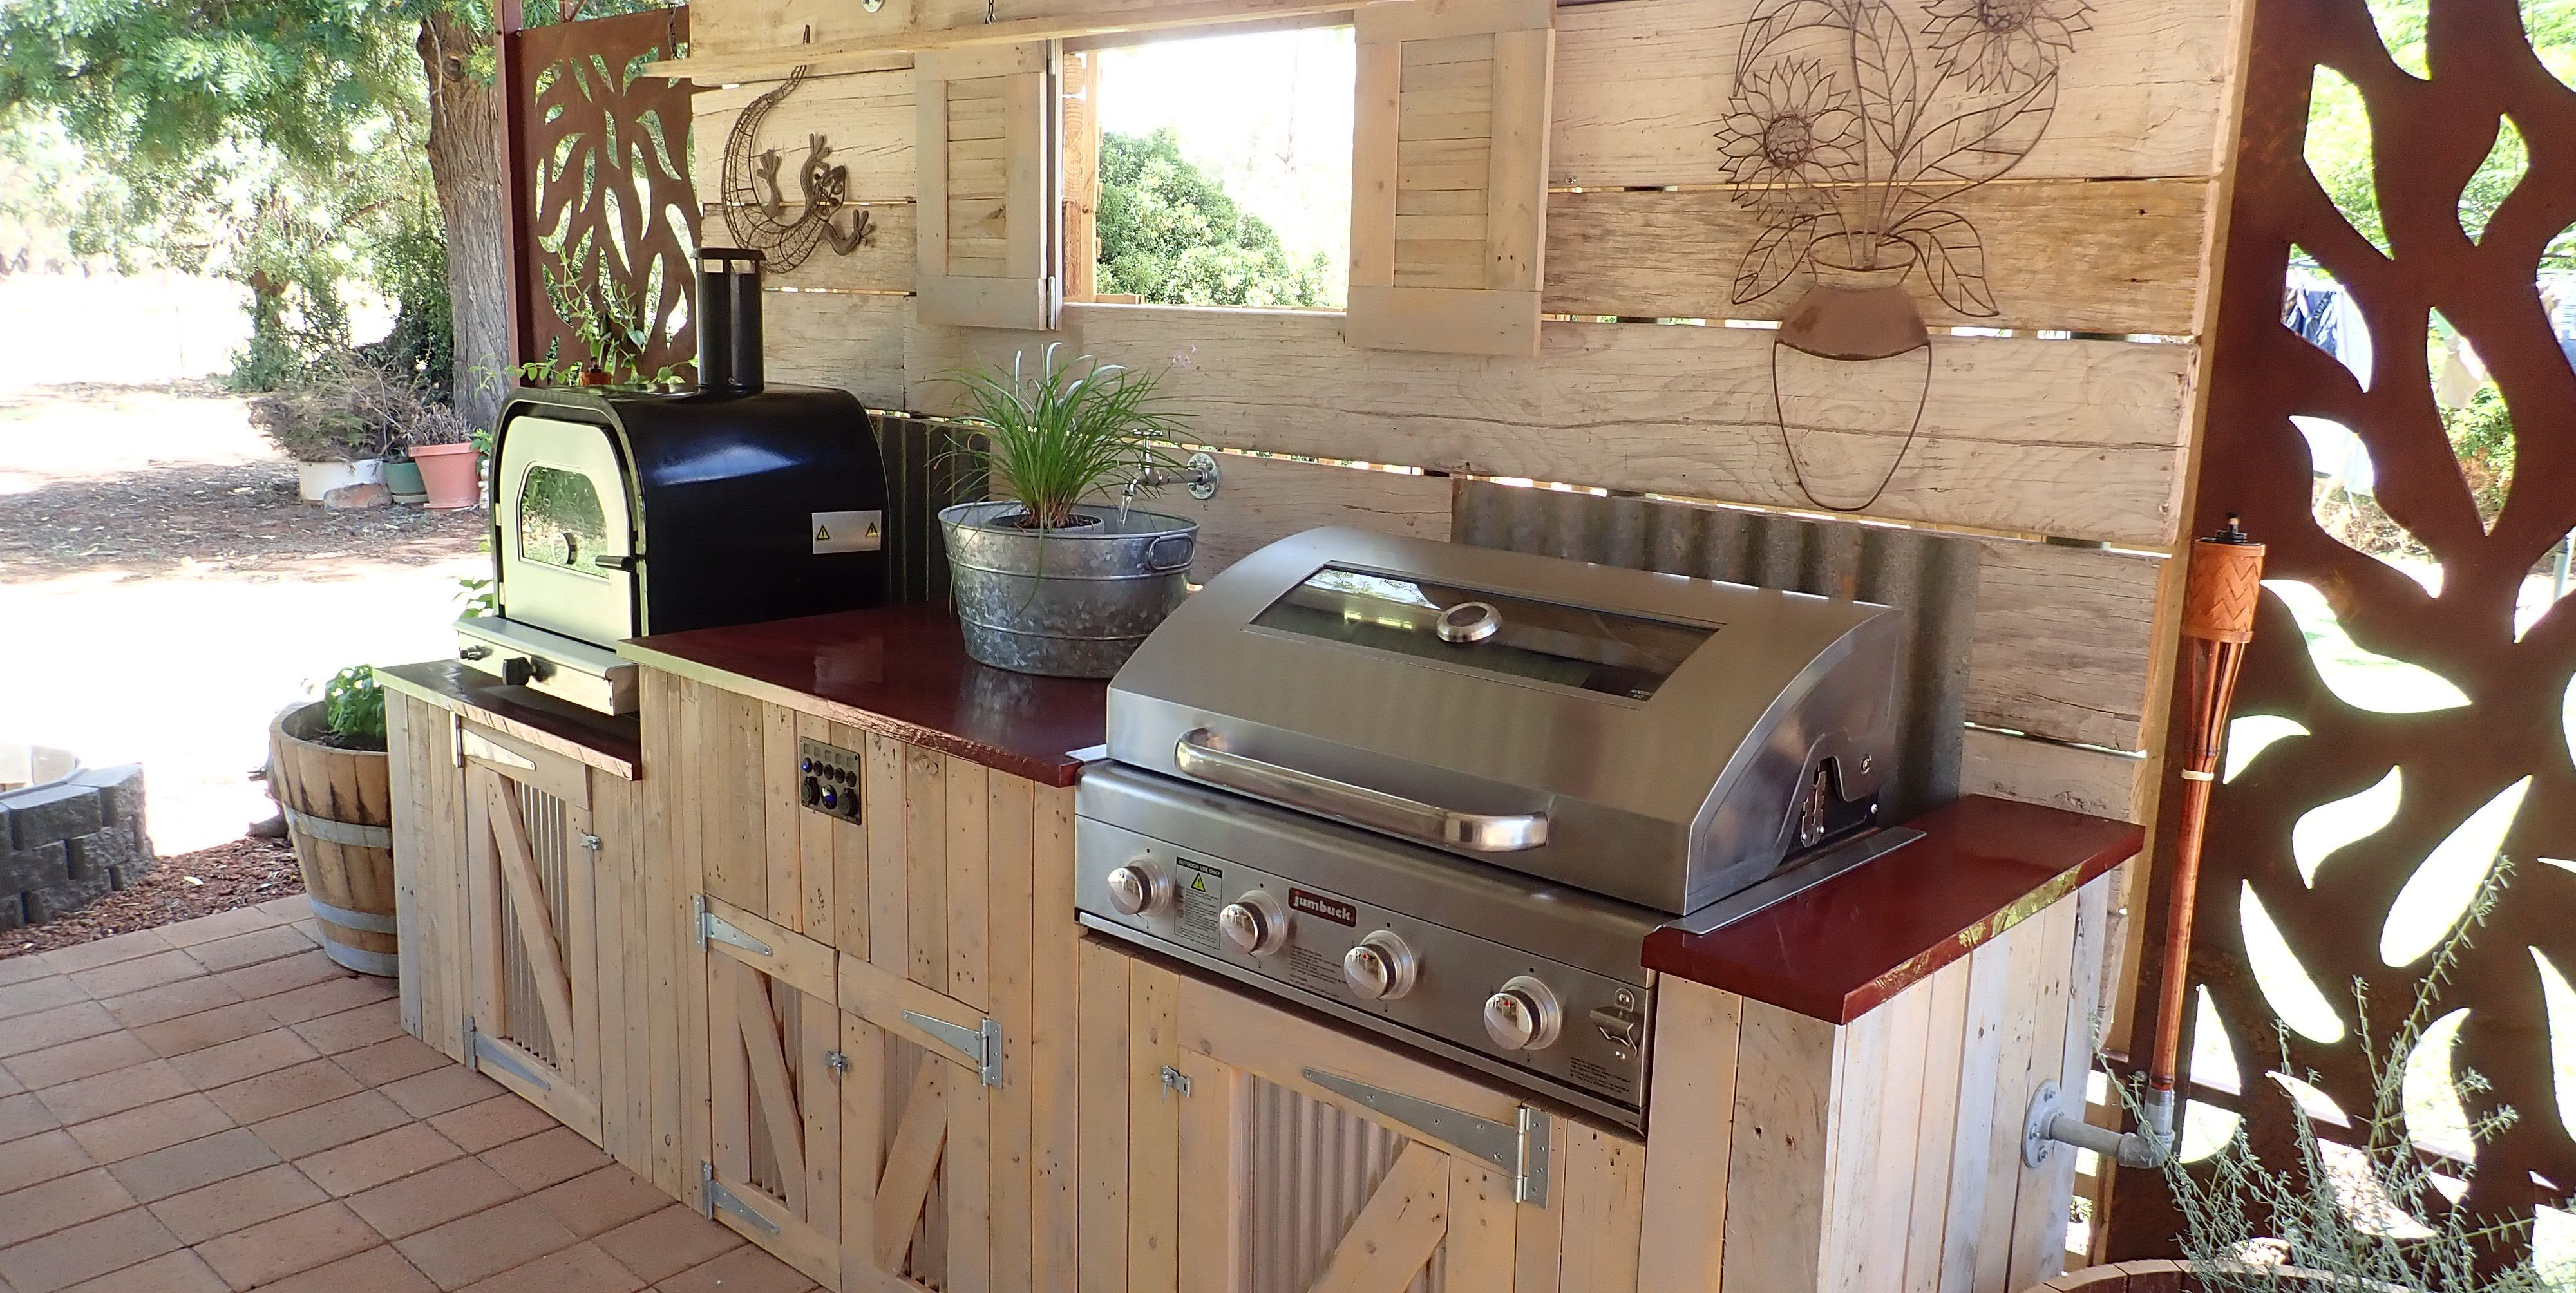 Outdoor kitchen ideas for your home   Bunnings Workshop community